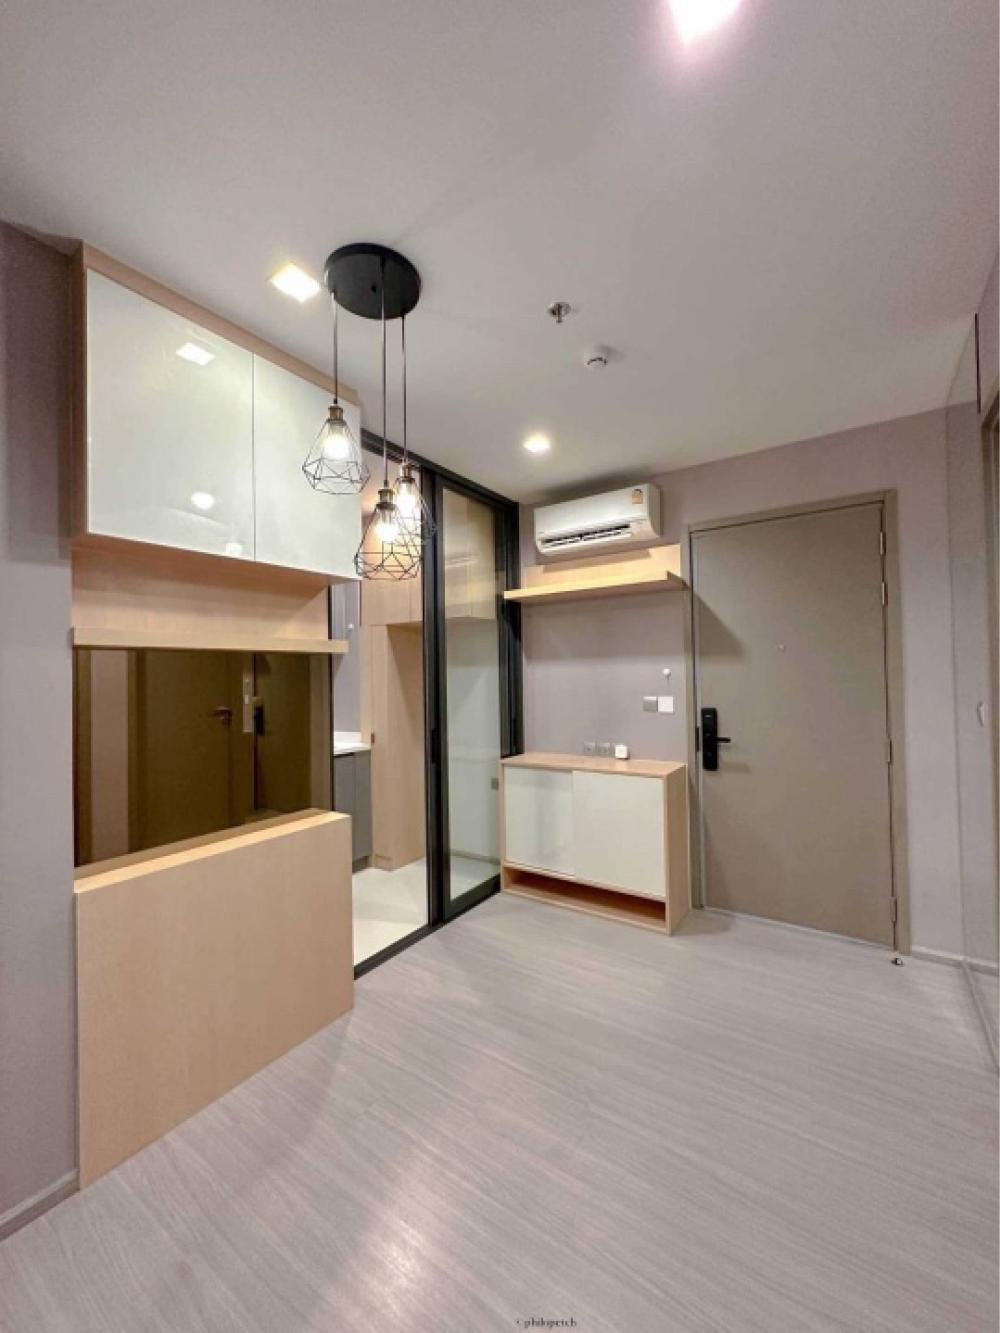 For SaleCondoRama9, Petchburi, RCA : Fire price🔥5,350,000🔥Life Asoke Hype | Life Asoke Hype 💖Line : amapat_br ,Tel : 065-821-5651 1 bedroom, size 40.57 sq m., complete with built-ins, beautiful view, morning sun☀️